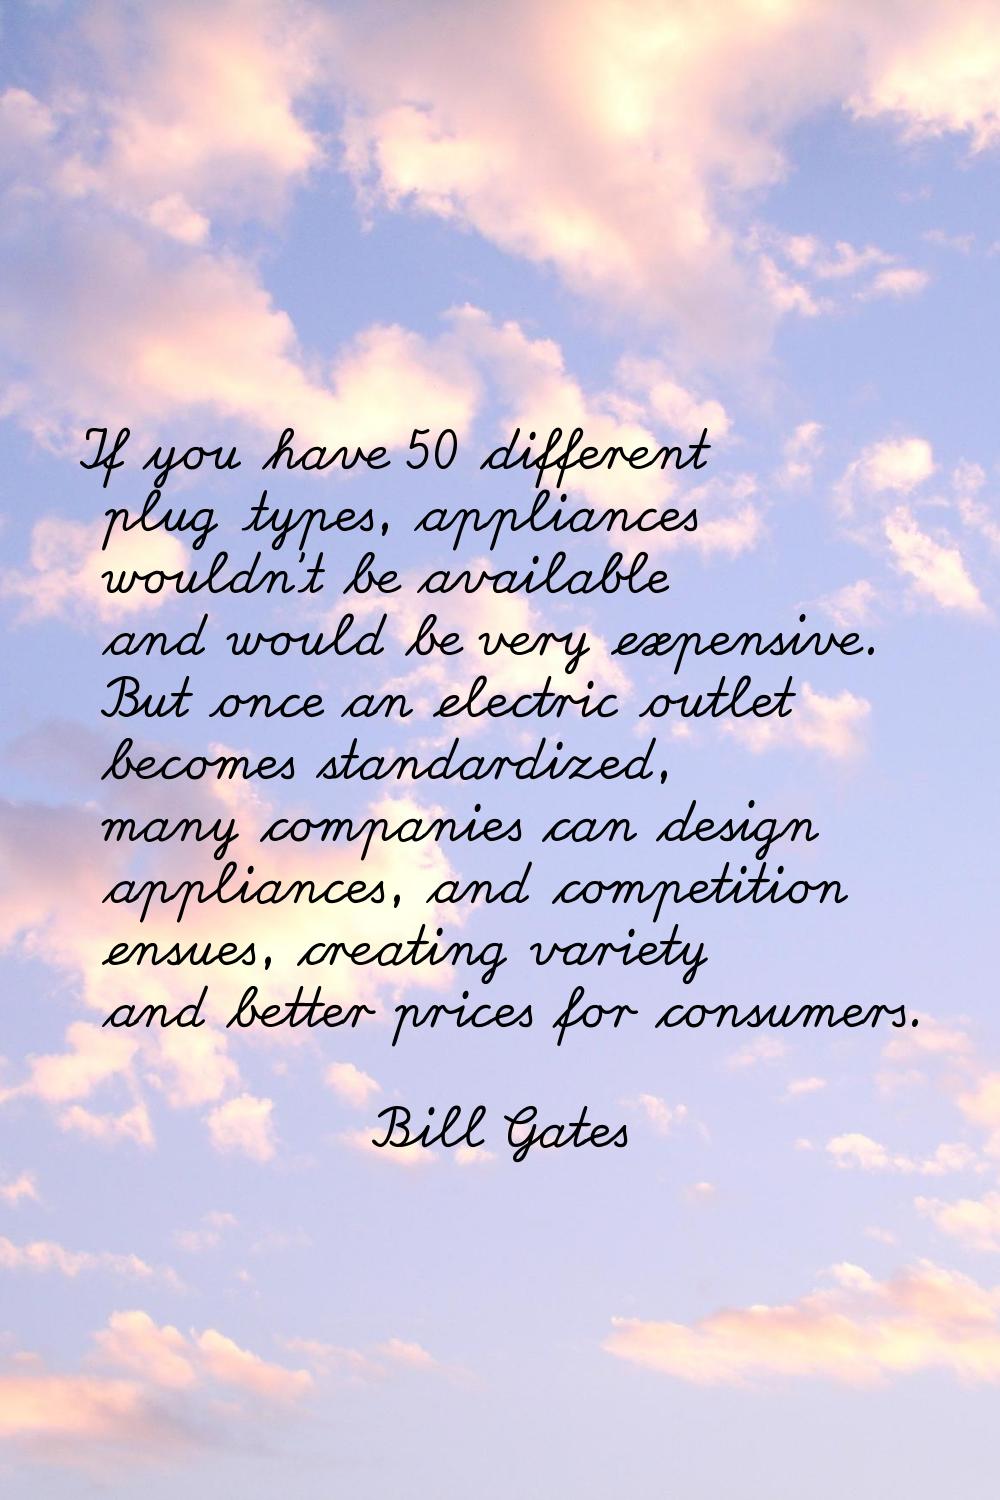 If you have 50 different plug types, appliances wouldn't be available and would be very expensive. 